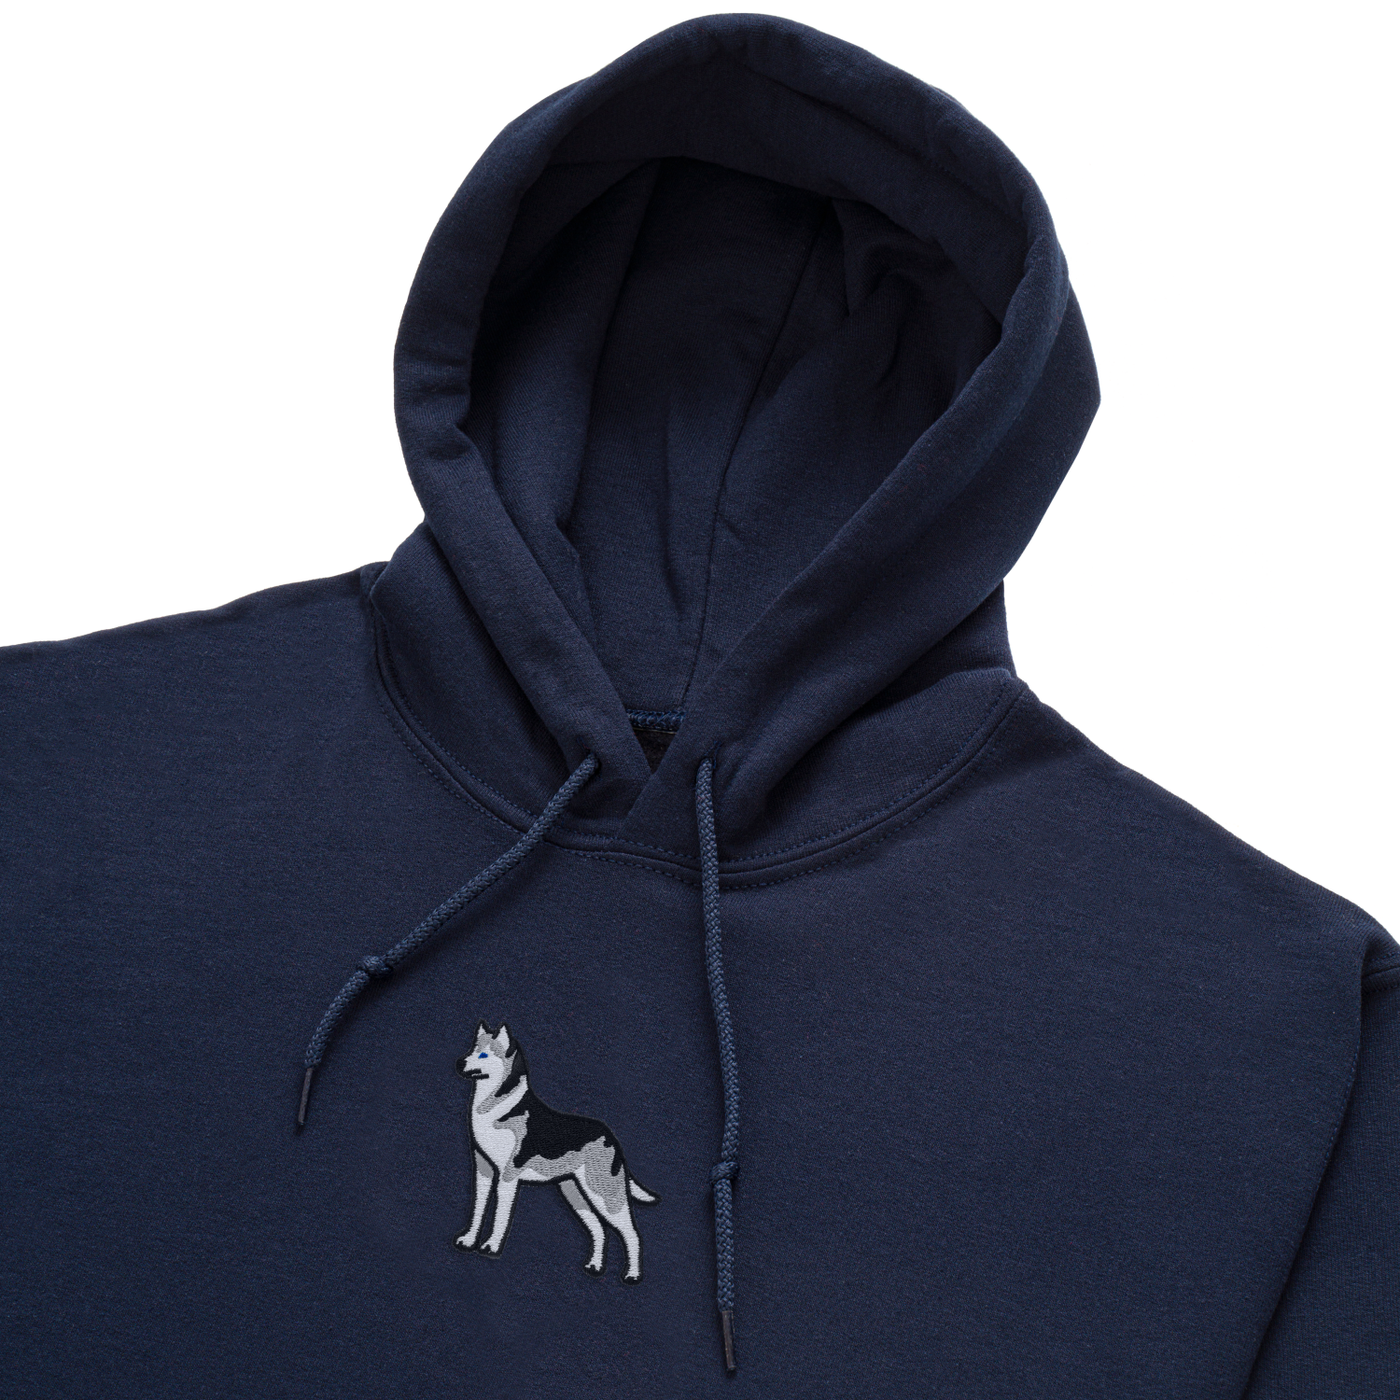 Bobby's Planet Women's Embroidered Siberian Husky Hoodie from Paws Dog Cat Animals Collection in Navy Color#color_navy